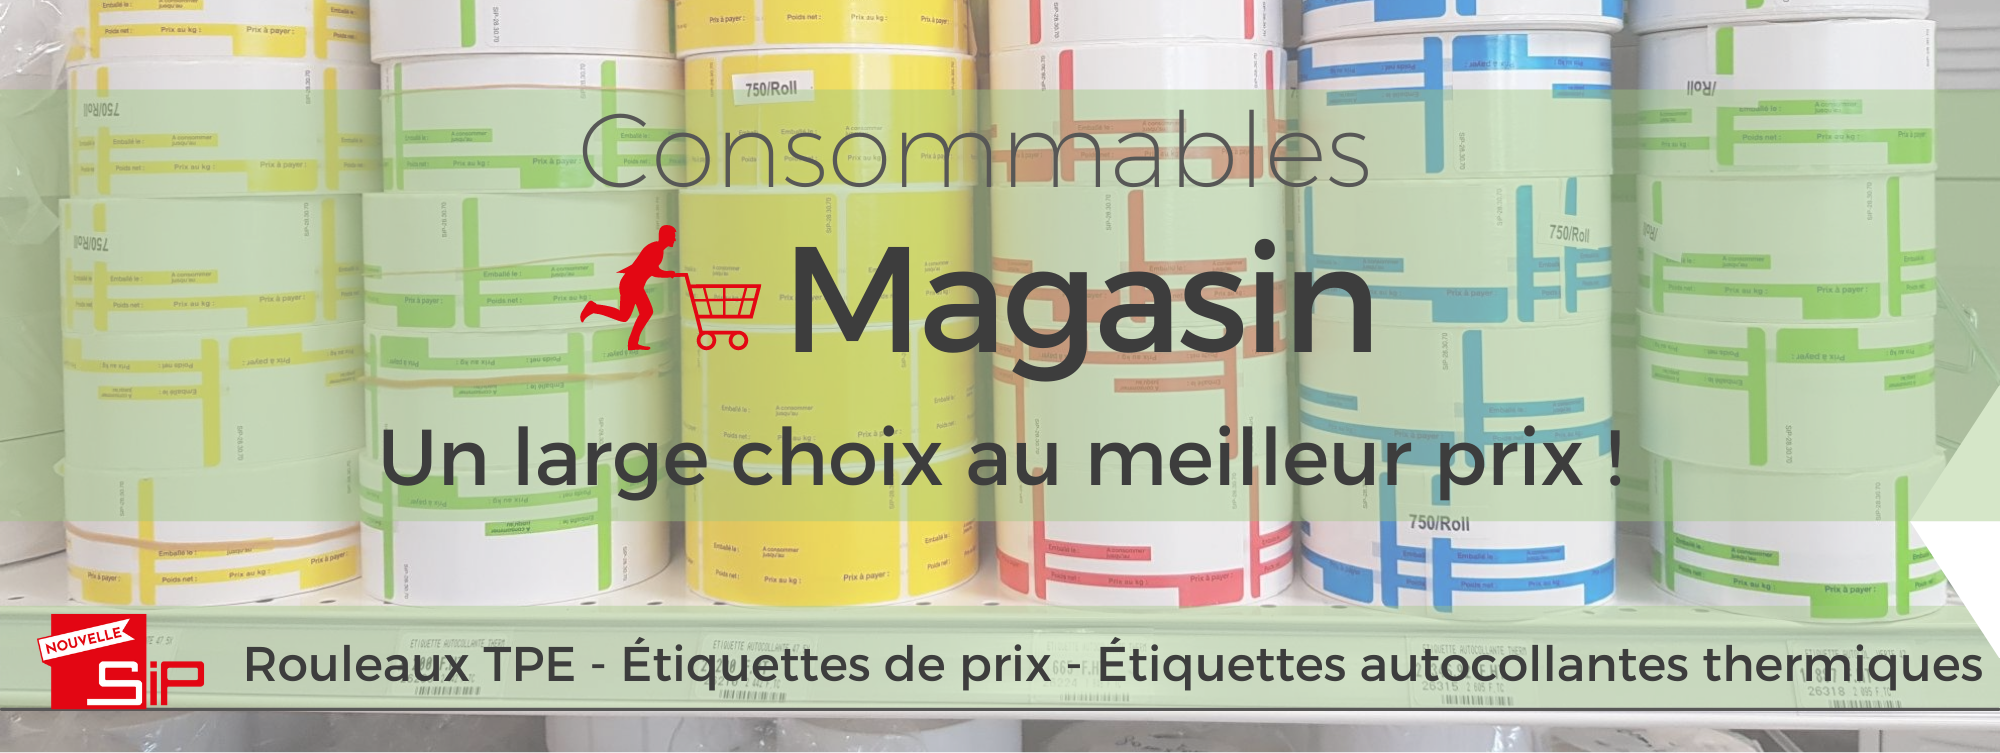 consommables magasin